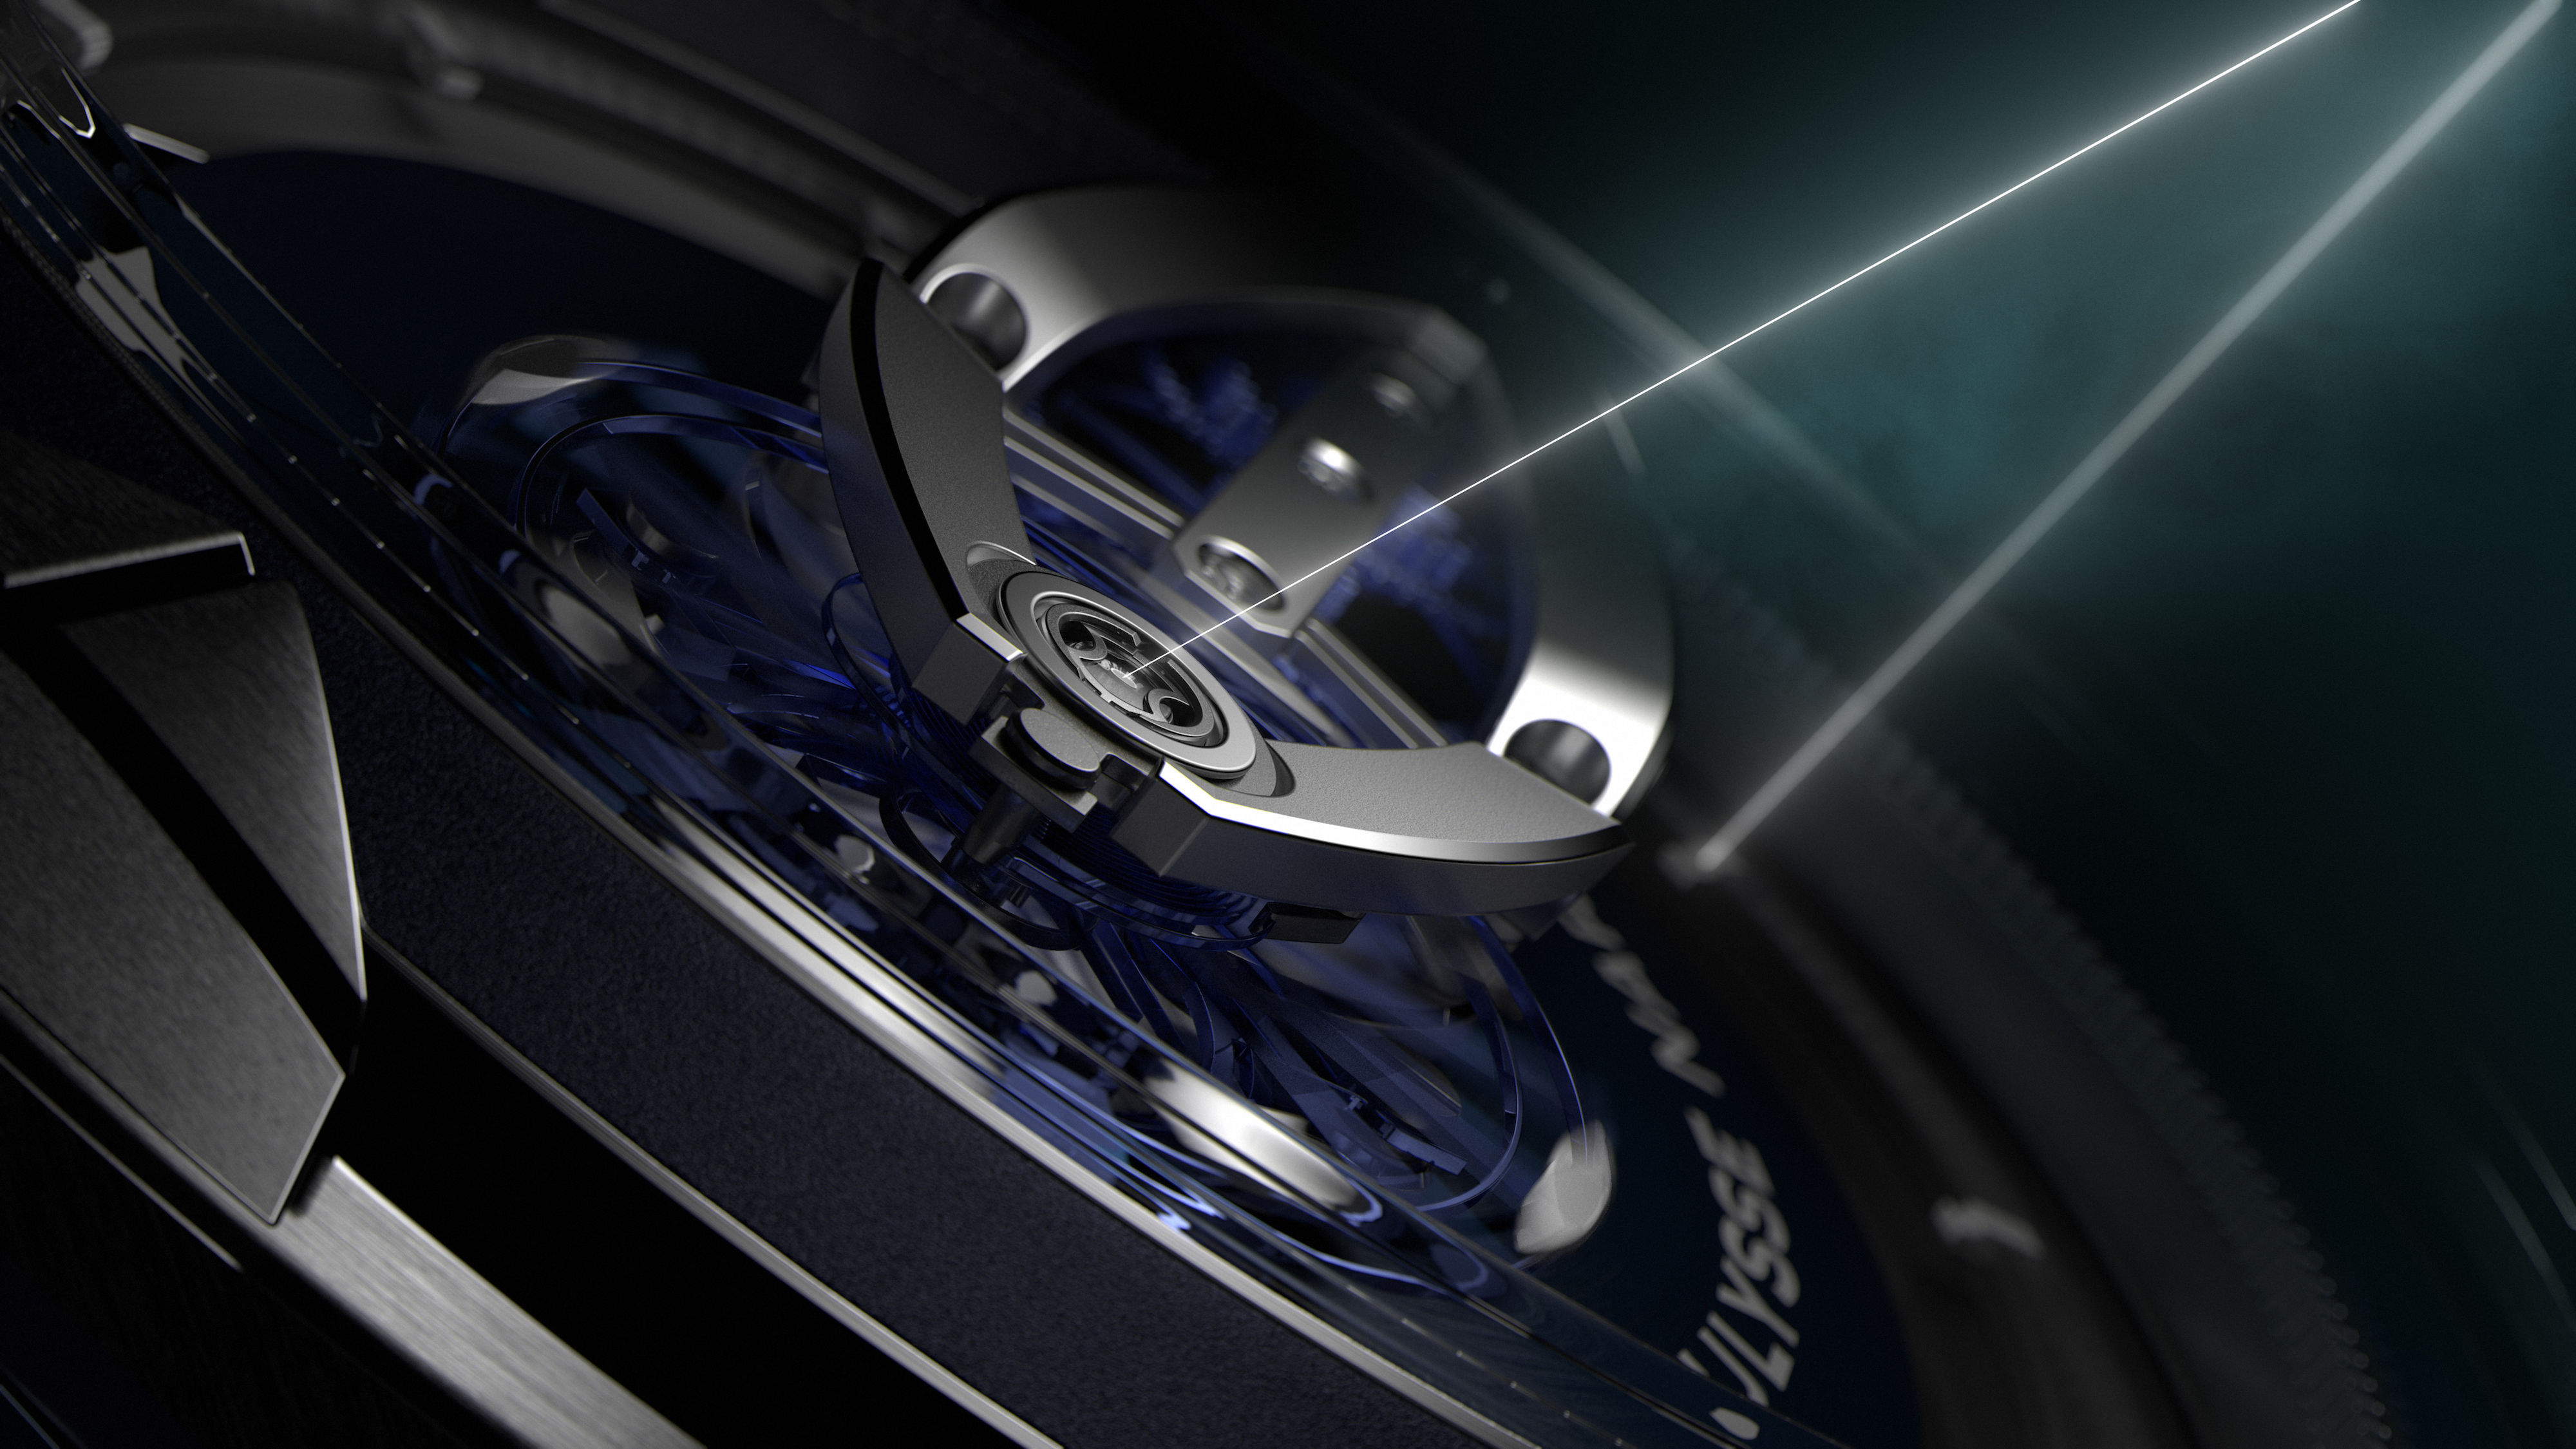 Ulysse Nardin pours a vision of the future into its newest SIHH release